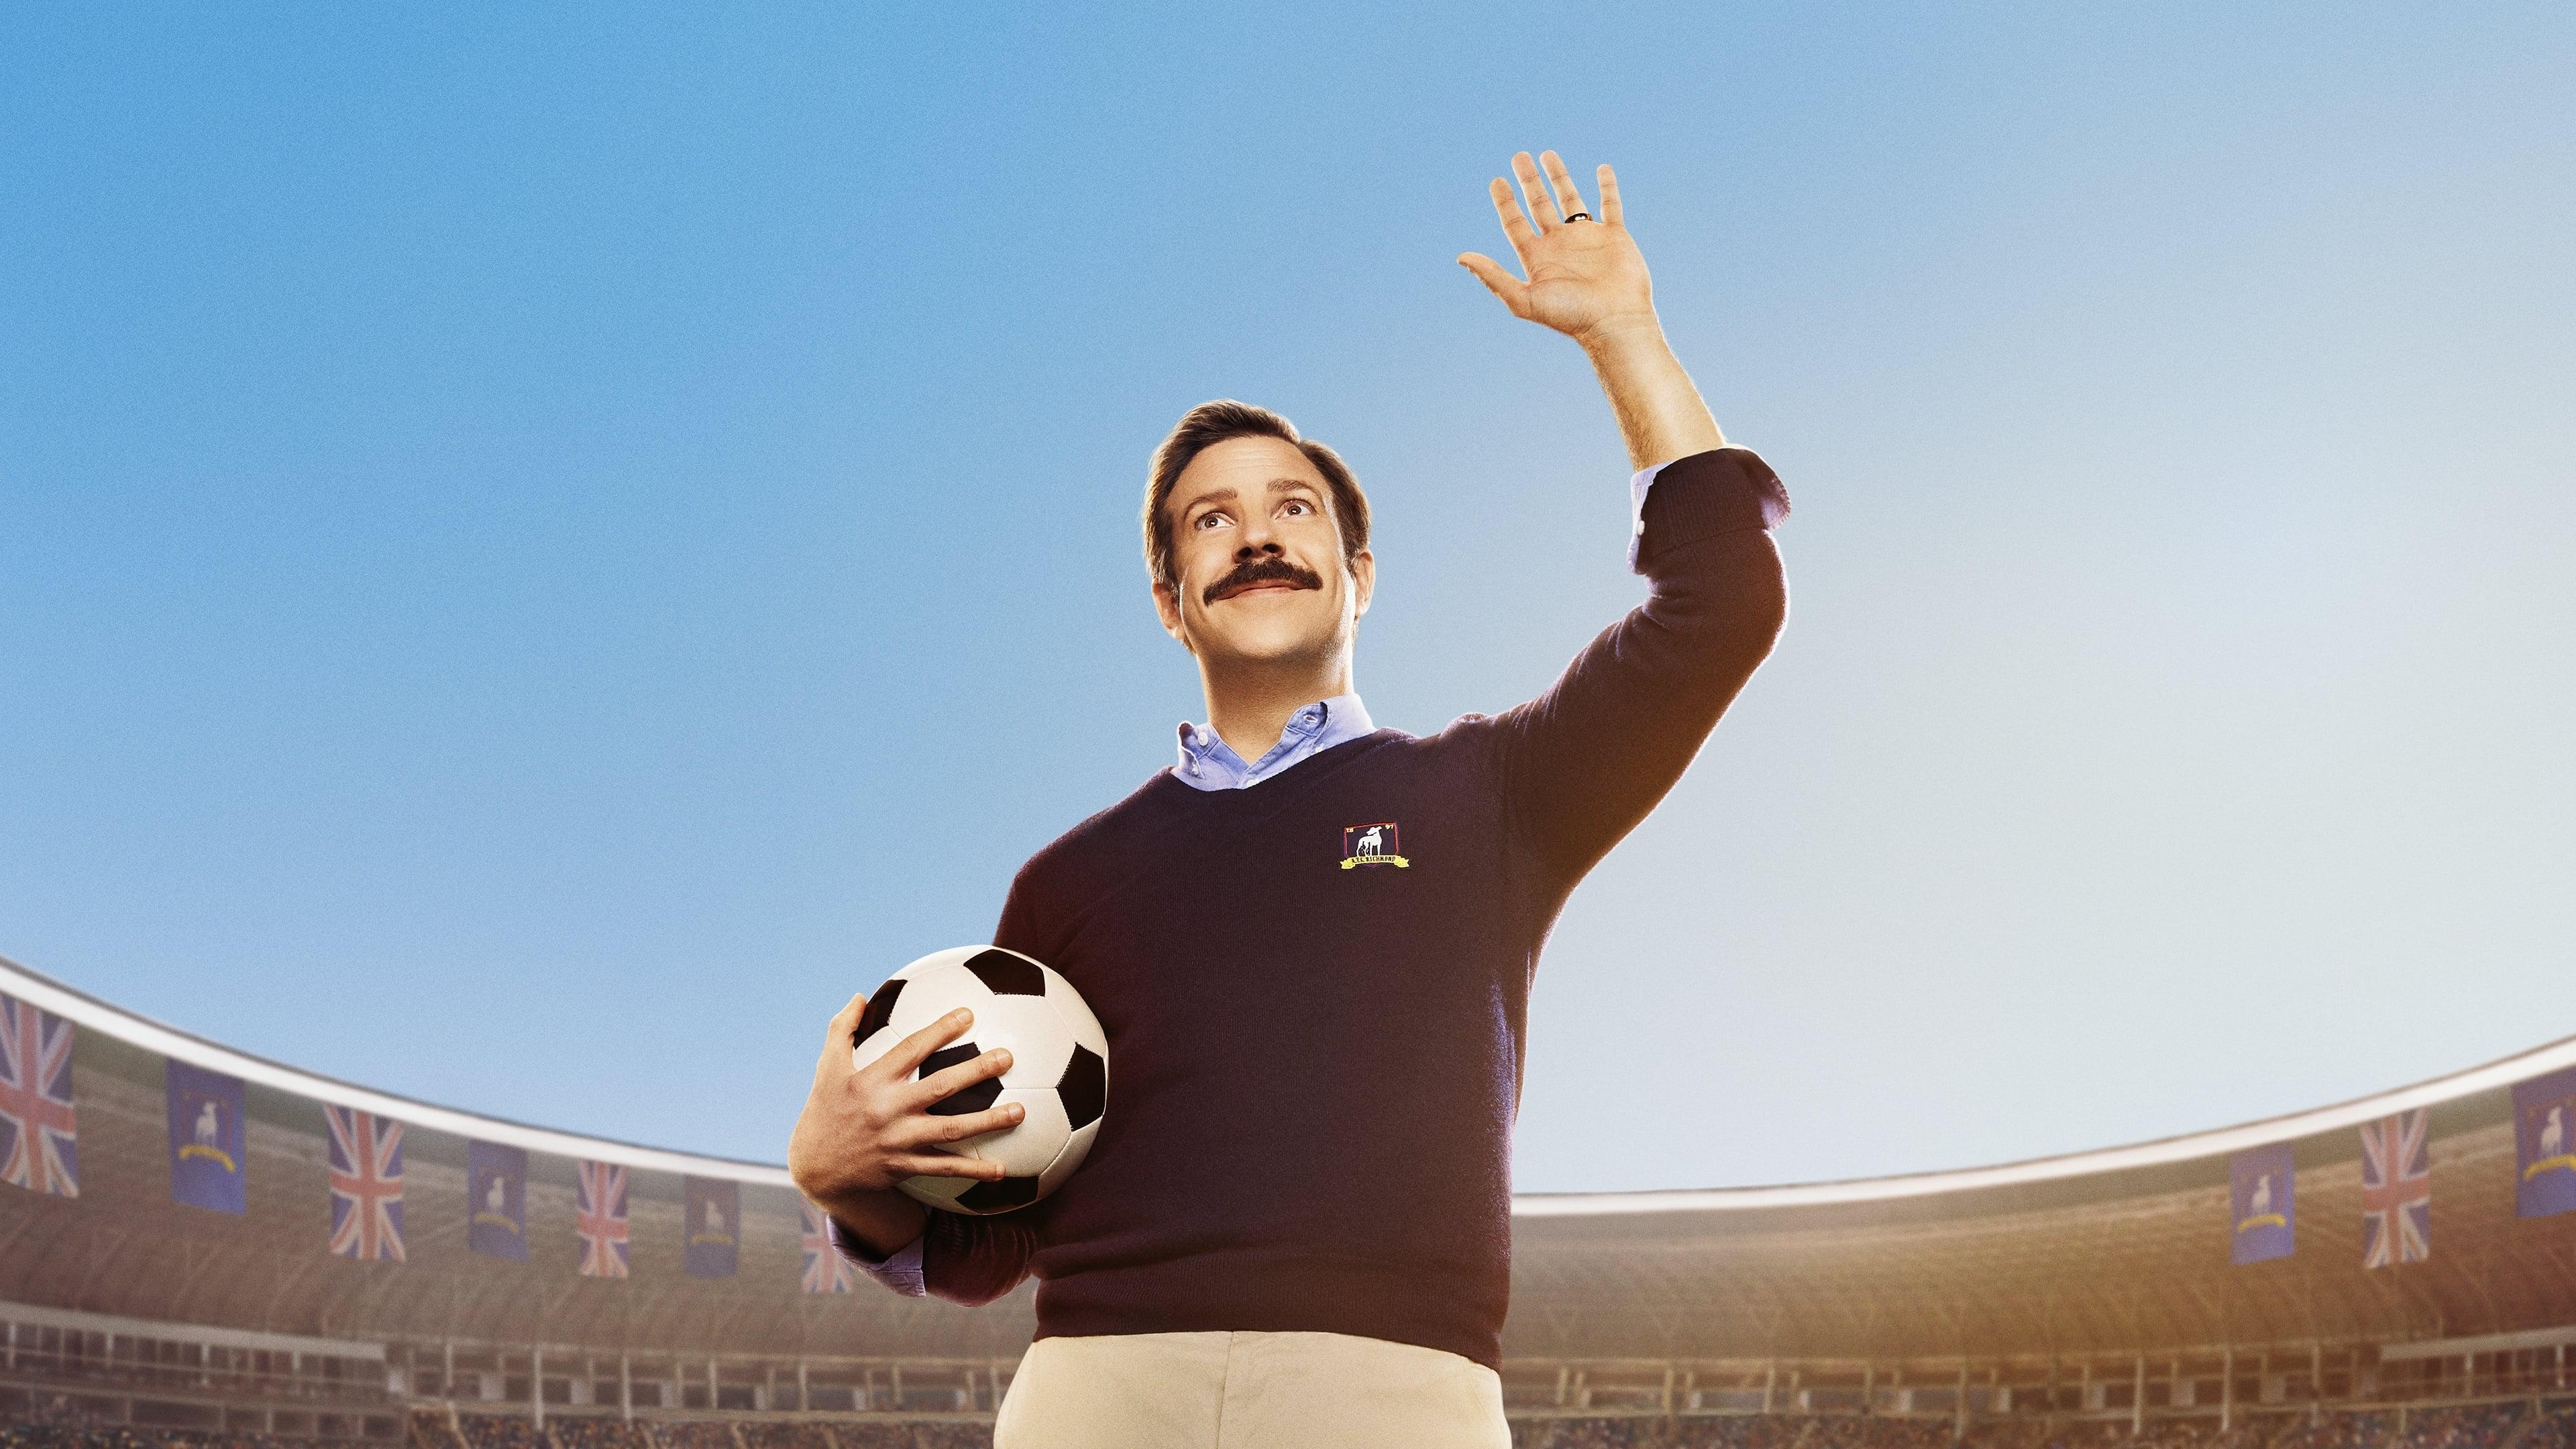 Jason Sudeikis as his character Ted Lasso holding a soccer ball with a raised hand, set against a sunny sky and soccer stadium.